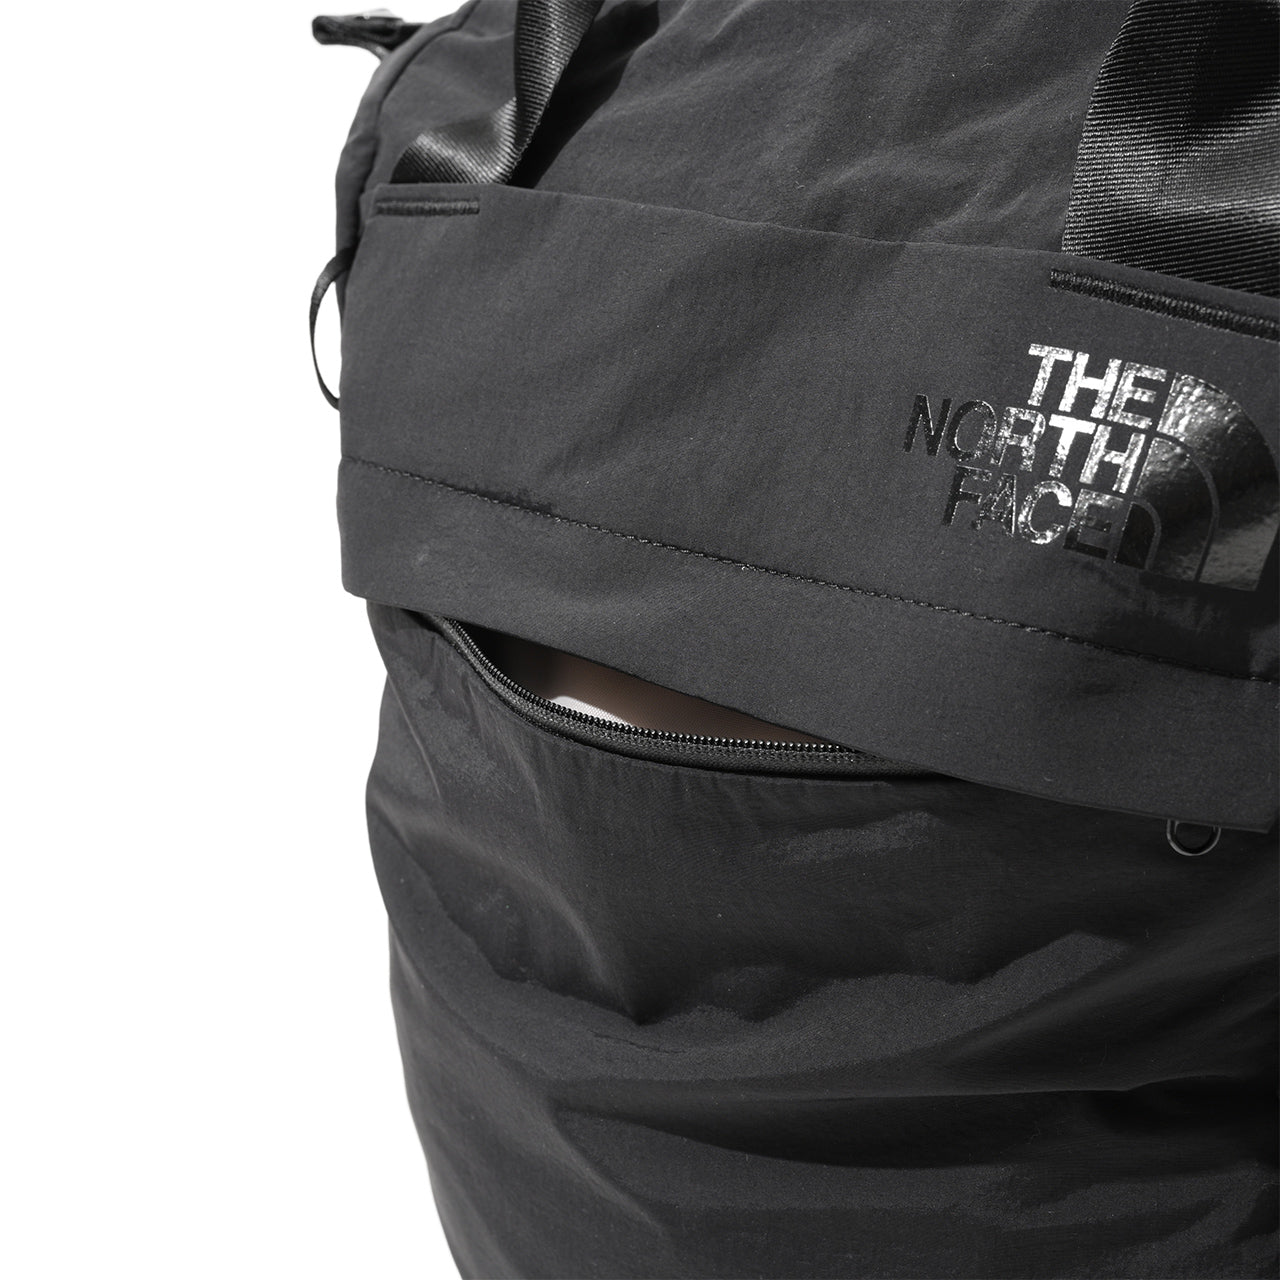 THE NORTH FACE ノースフェイス ネバーストップ ユーティリティ バッグ W Never Stop Utility Pack 23L デイパック バックパック リュックサック NMW82352【送料無料】